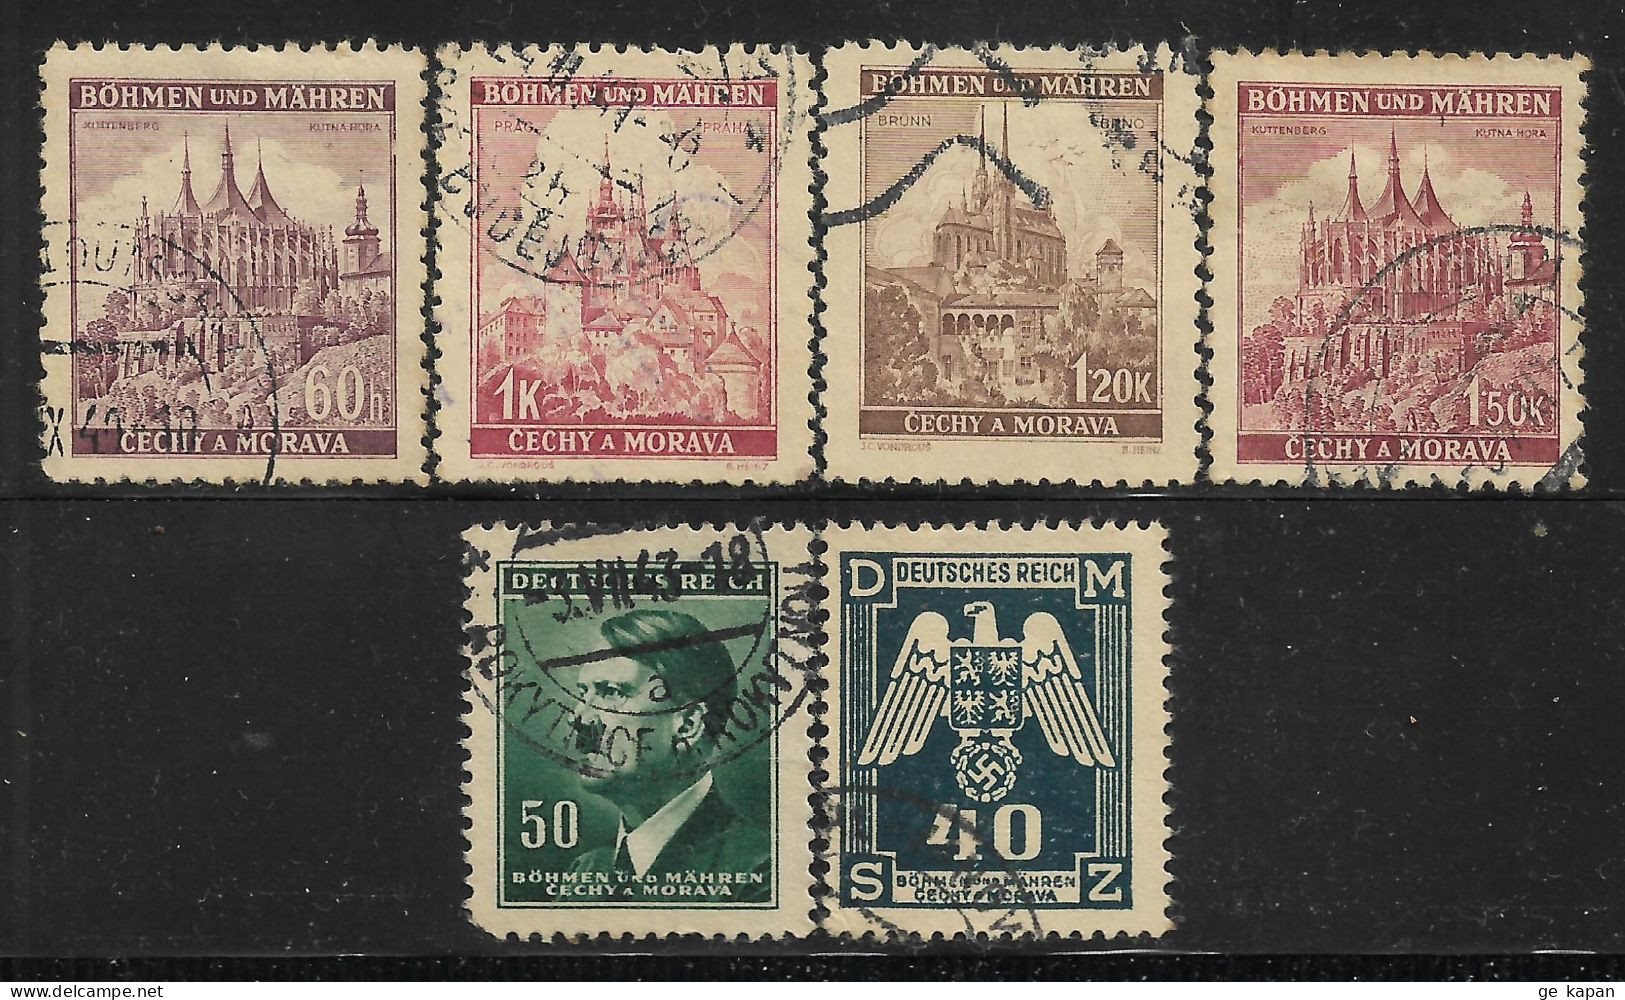 1939-1943 BOHEMIA & MORAVIA Set Of 6 USED STAMPS (Michel # 27,28,41,69b,92,Official 14) - Oblitérés